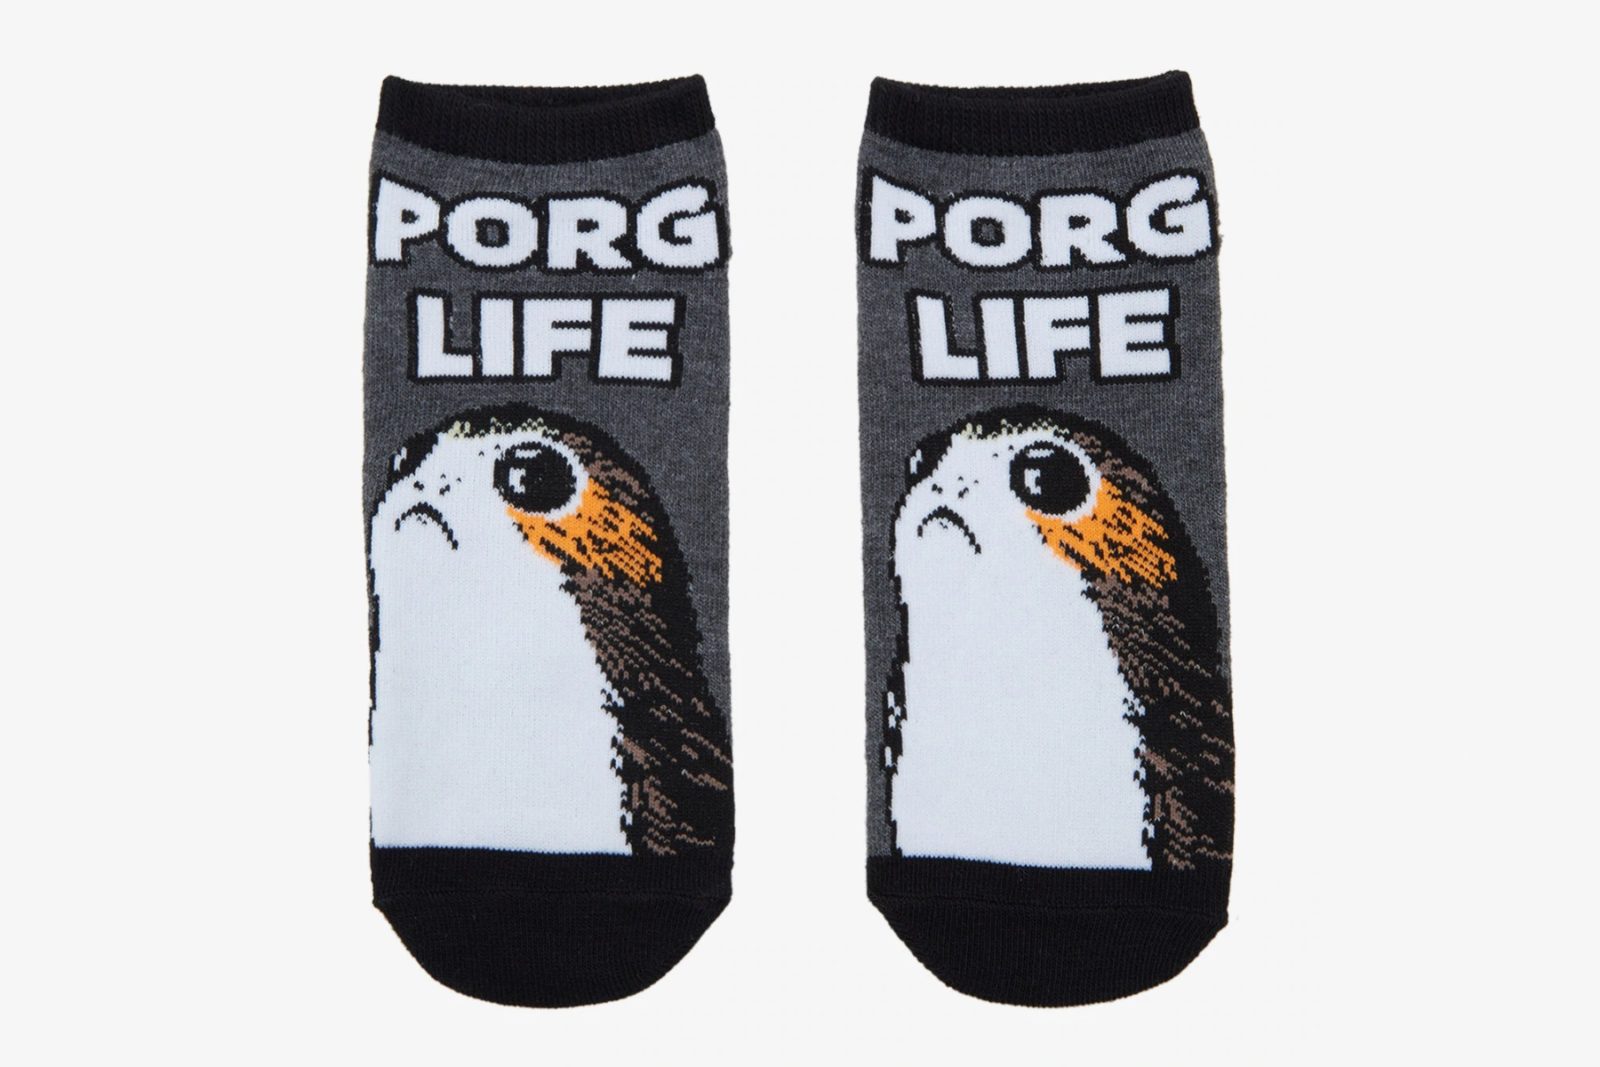 Cute ‘Porg Life’ Ankle Socks at Hot Topic